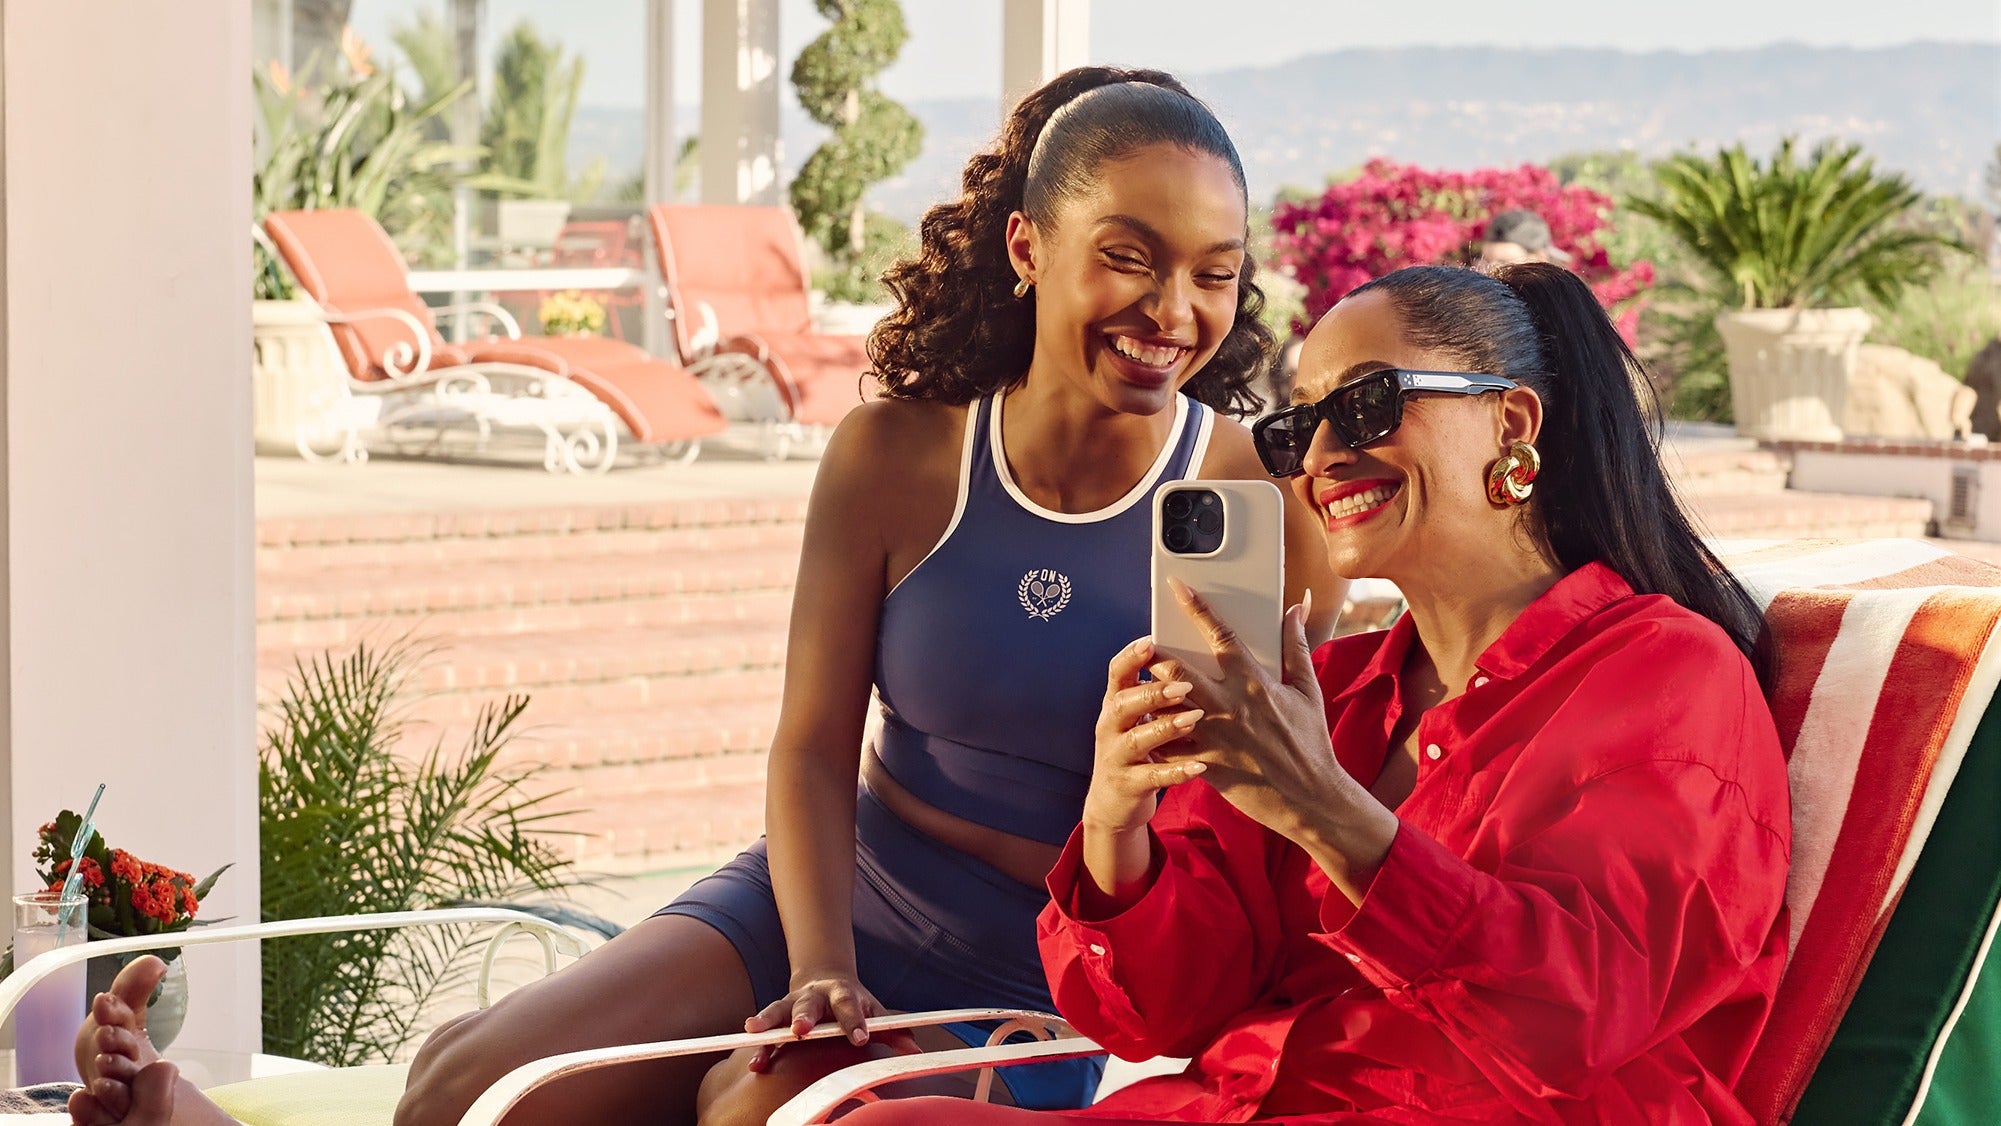 Tracee Ellis Ross And Yara Shahidi Reunite In The Latest Old Navy Campaign